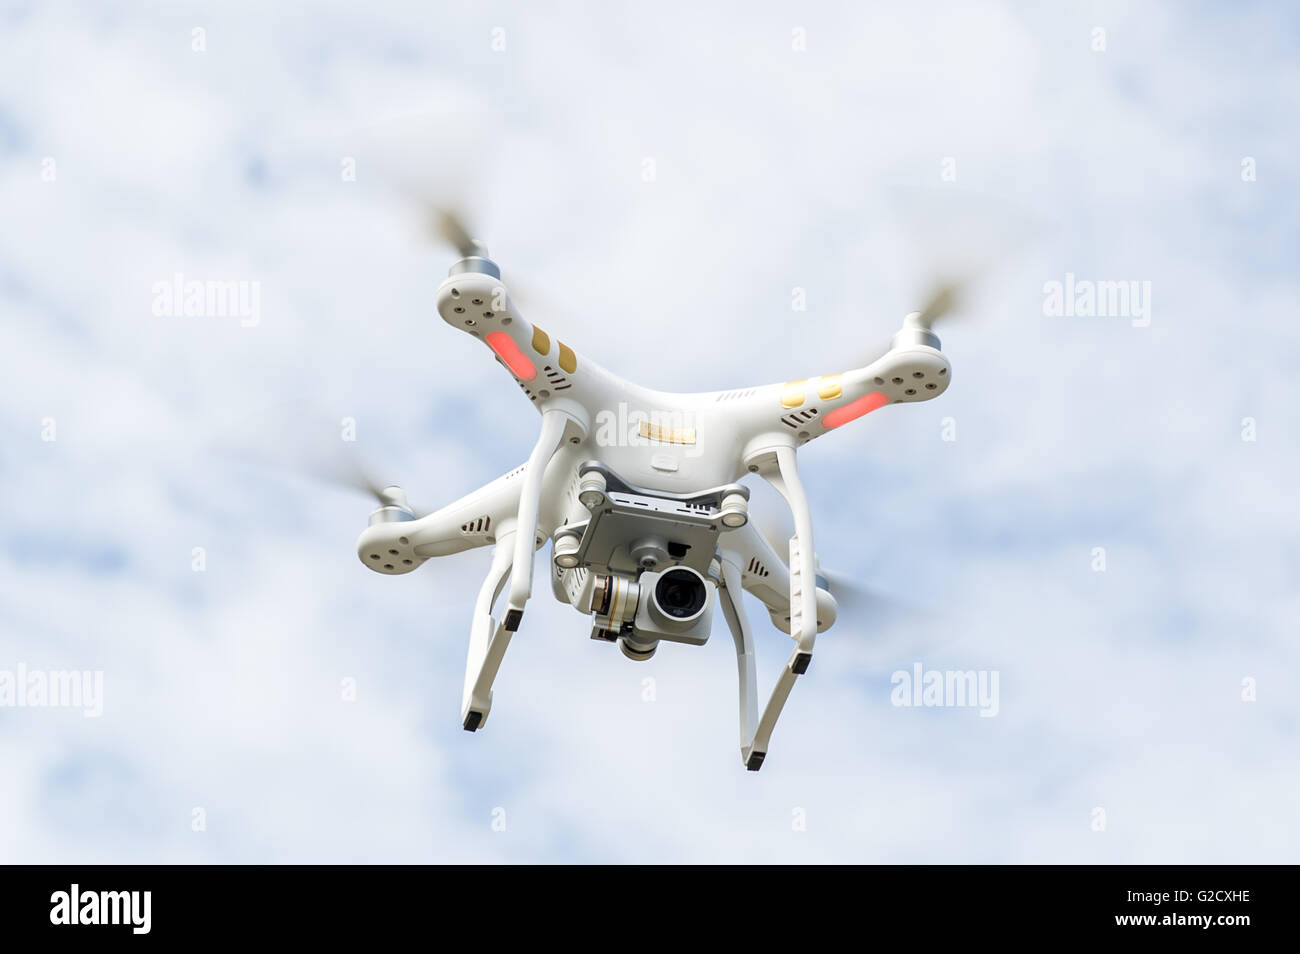 A DJI Phantom 3 Professional drone with camera hovers in the sky. Stock Photo